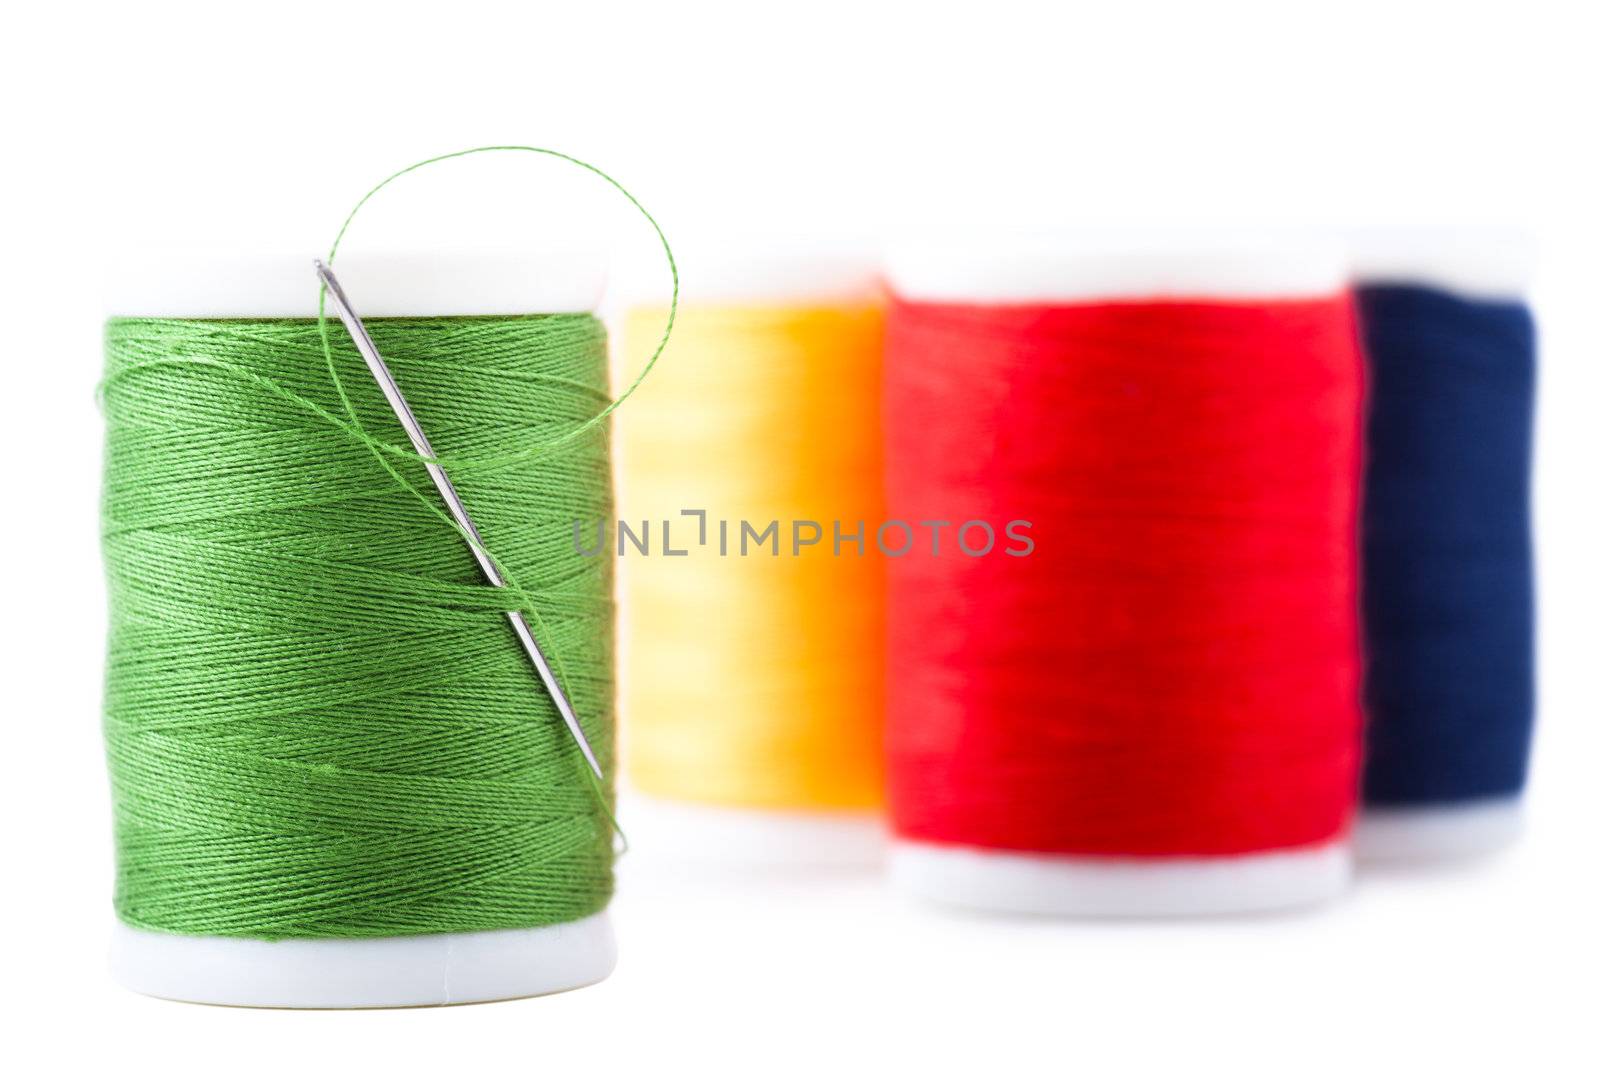 Four spools with green, red, blue and yellow thread and needle